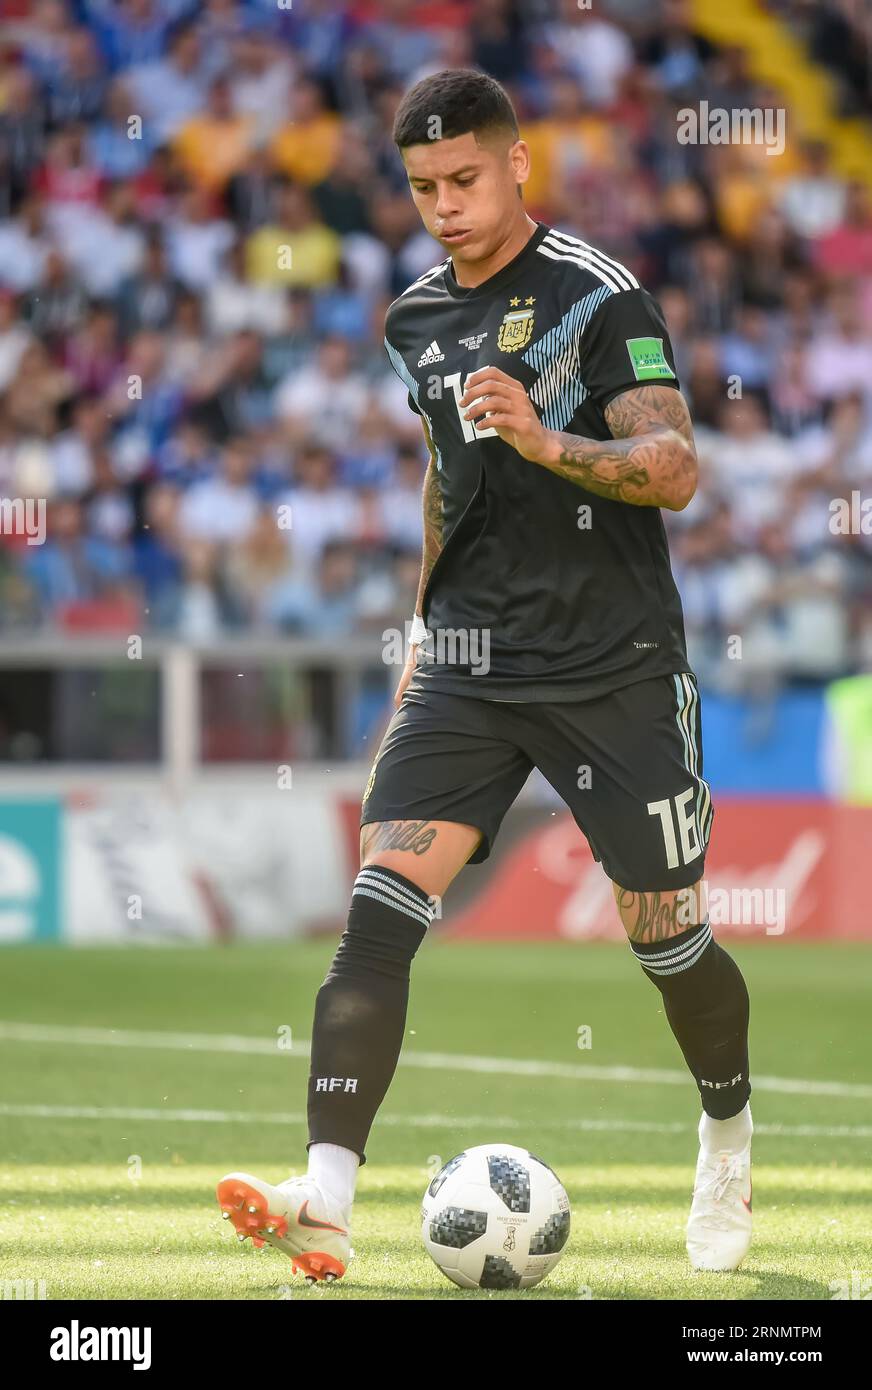 Moscow, Russia - June 16, 2018. Argentina national football team defender Marcos Rojo during FIFA World Cup 2018 match Argentina vs Iceland (1-1). Stock Photo